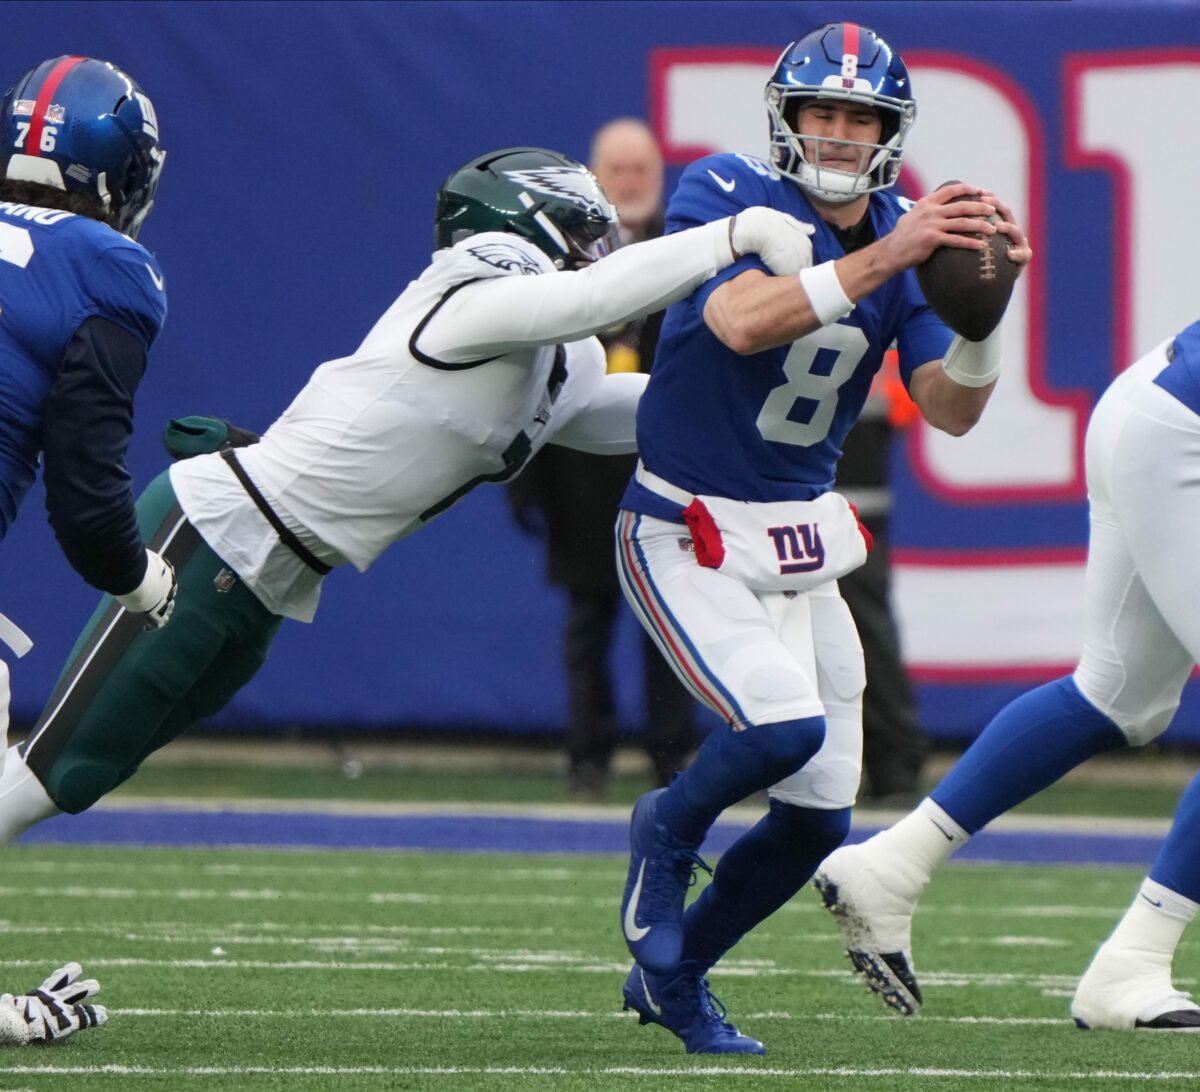 NFL Playoffs: Eagles must ramp up their league-best pass rush to beat the Giants